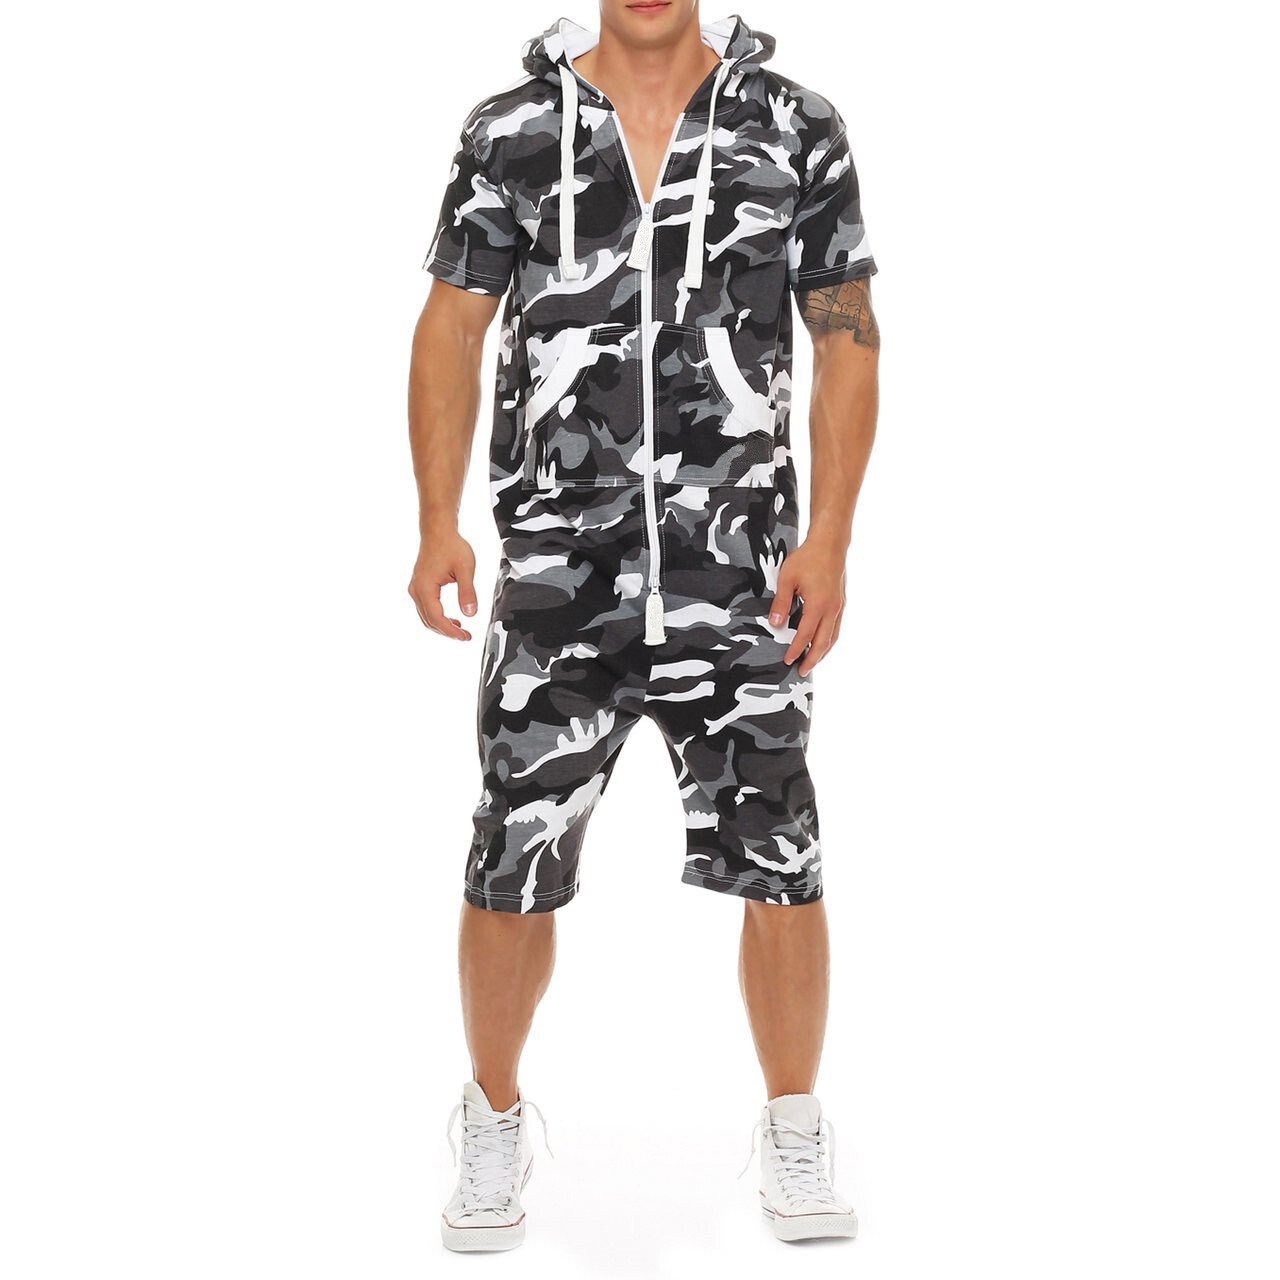 ZN 2021 new top and shorts clothing track Camouflage casual men's suits